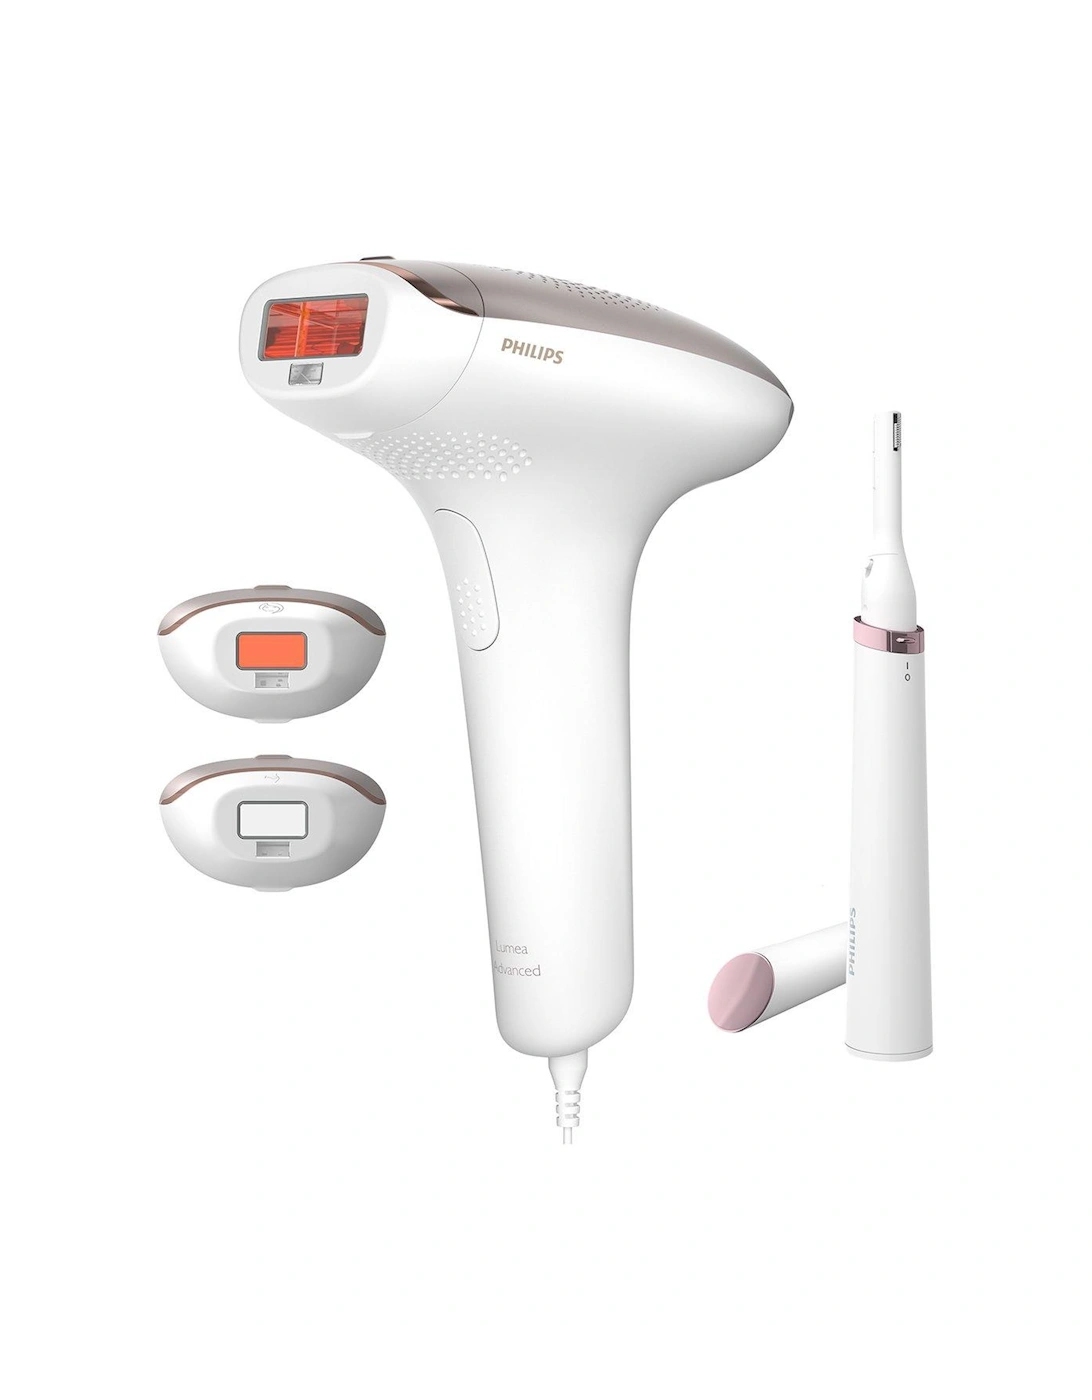 Lumea IPL 7000 Series, corded with 3 attachments for Body, Face and Bikini with pen trimmer – BRI923/00, 2 of 1